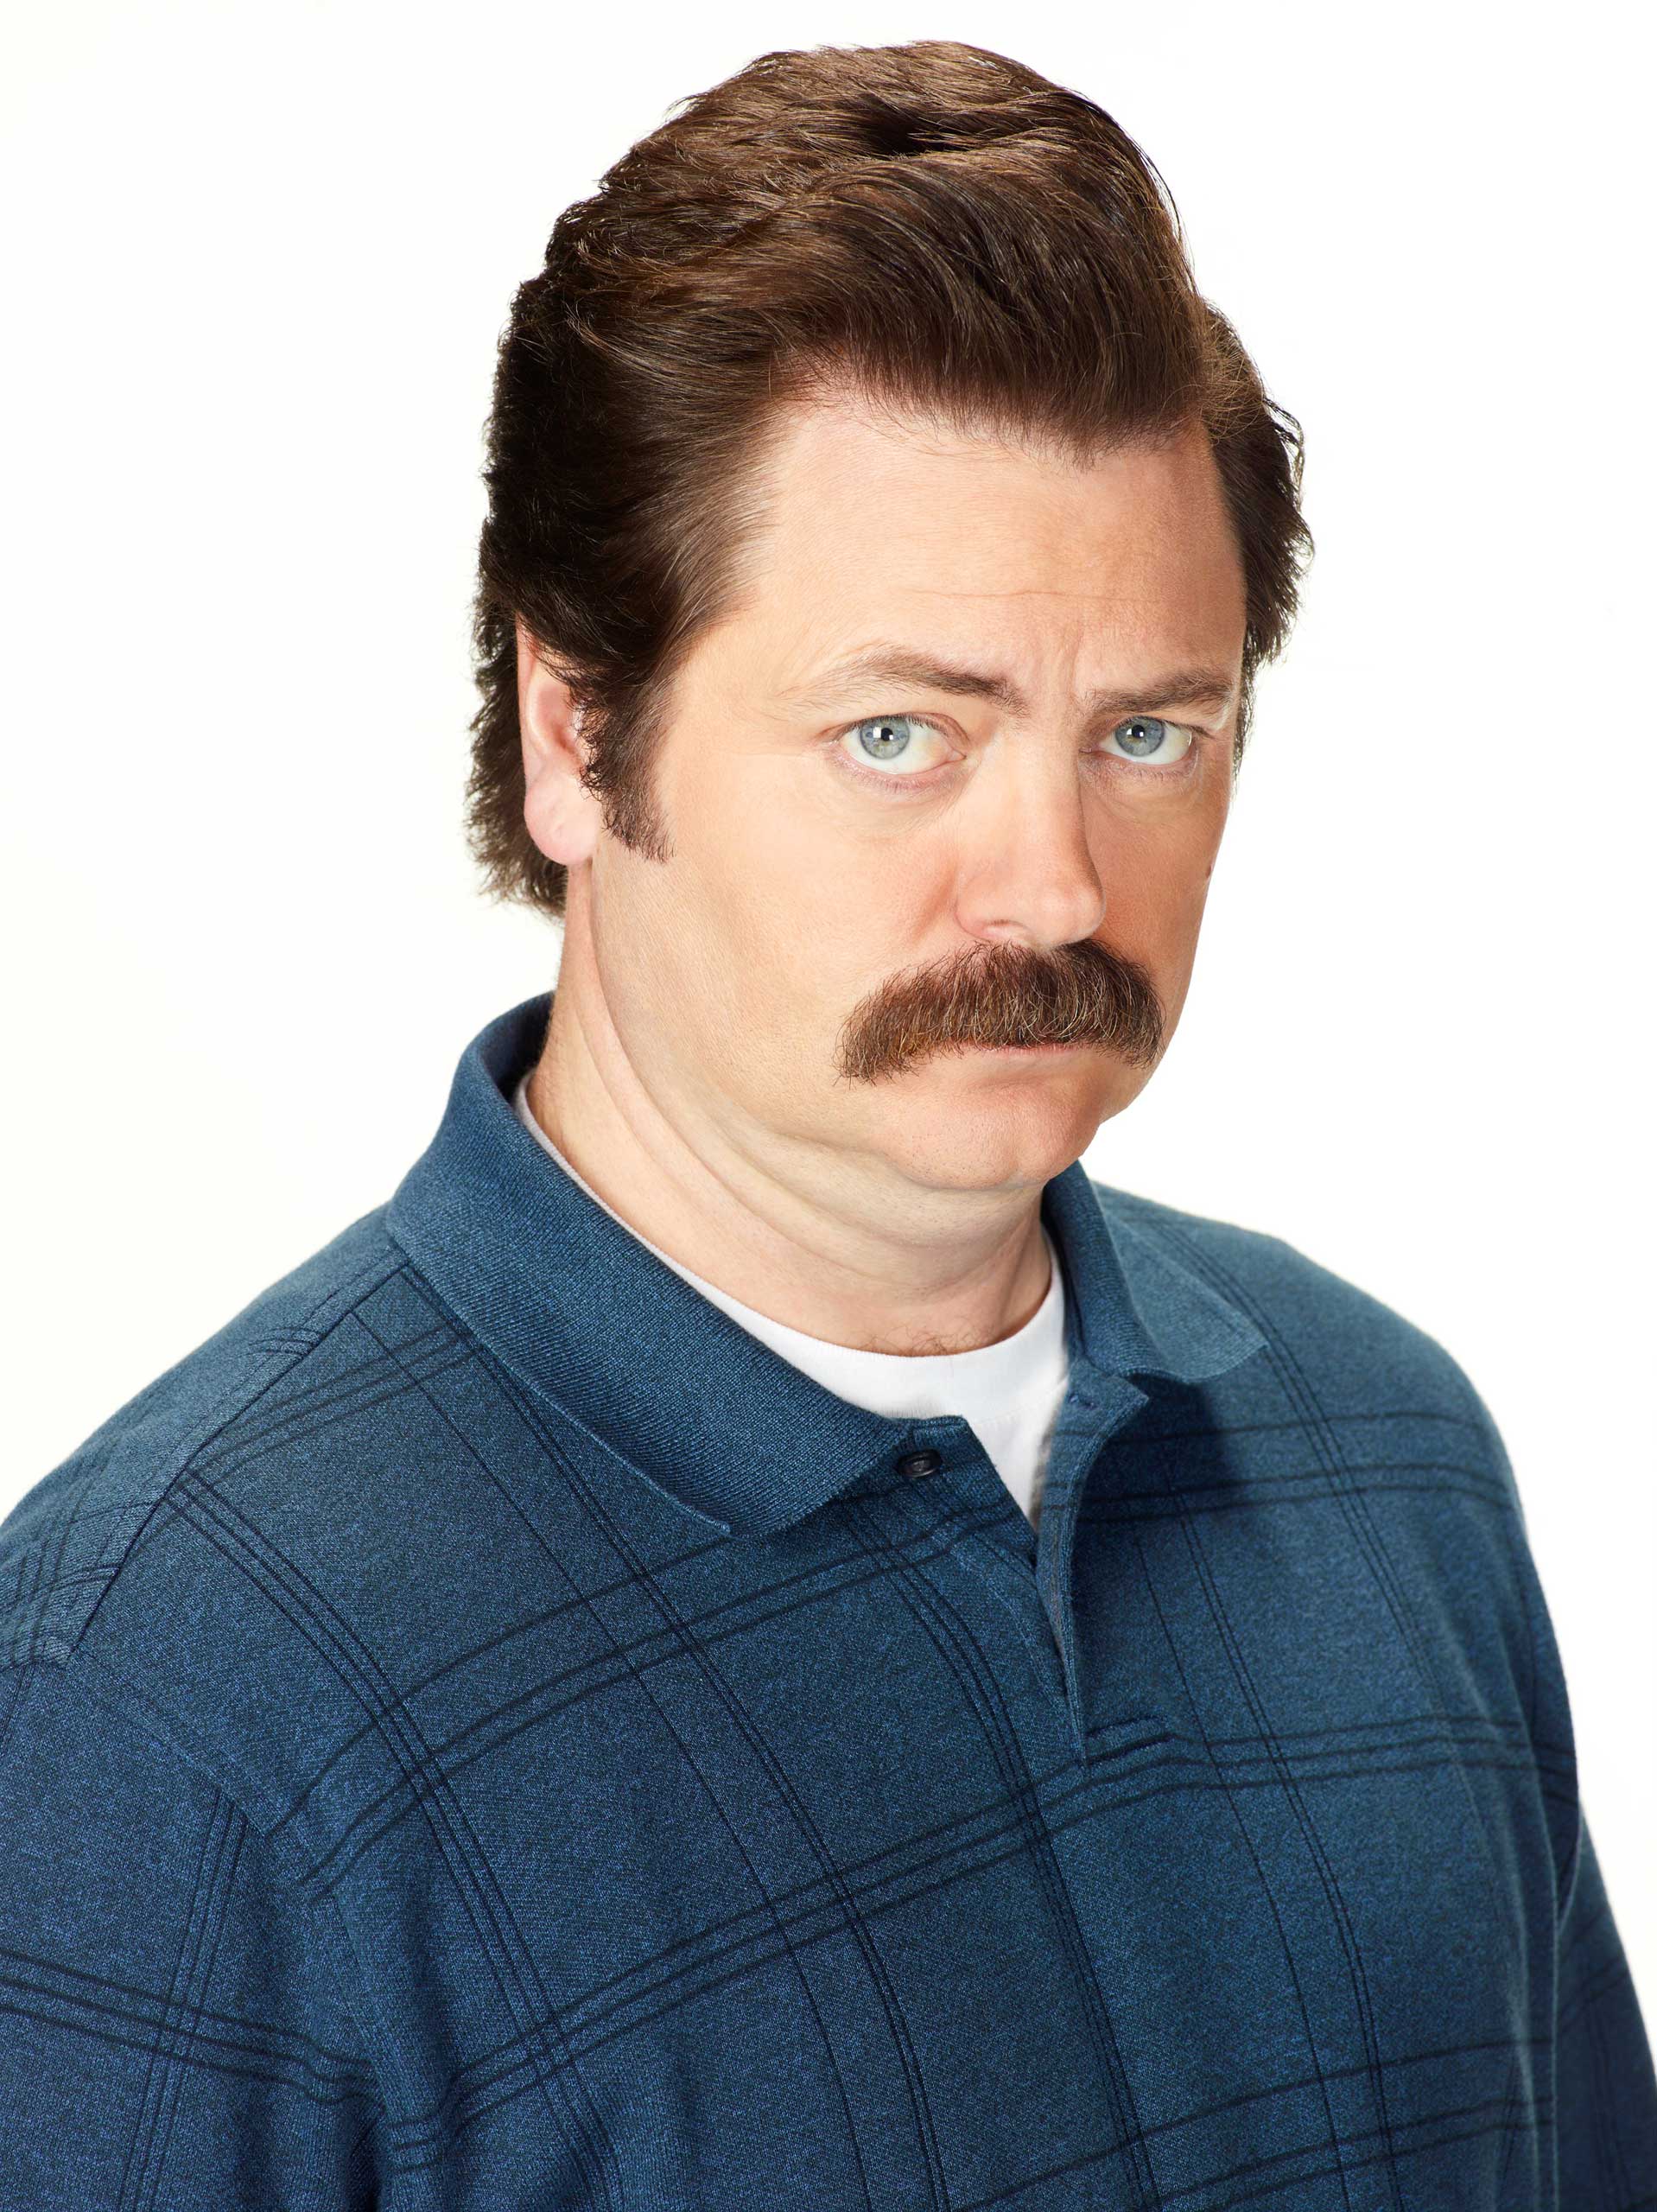 PARKS AND RECREATION -- Season: 6 -- Pictured: Nick Offerman as Ron Swanson -- (Photo by: /NBC/NBCU Photo Bank)